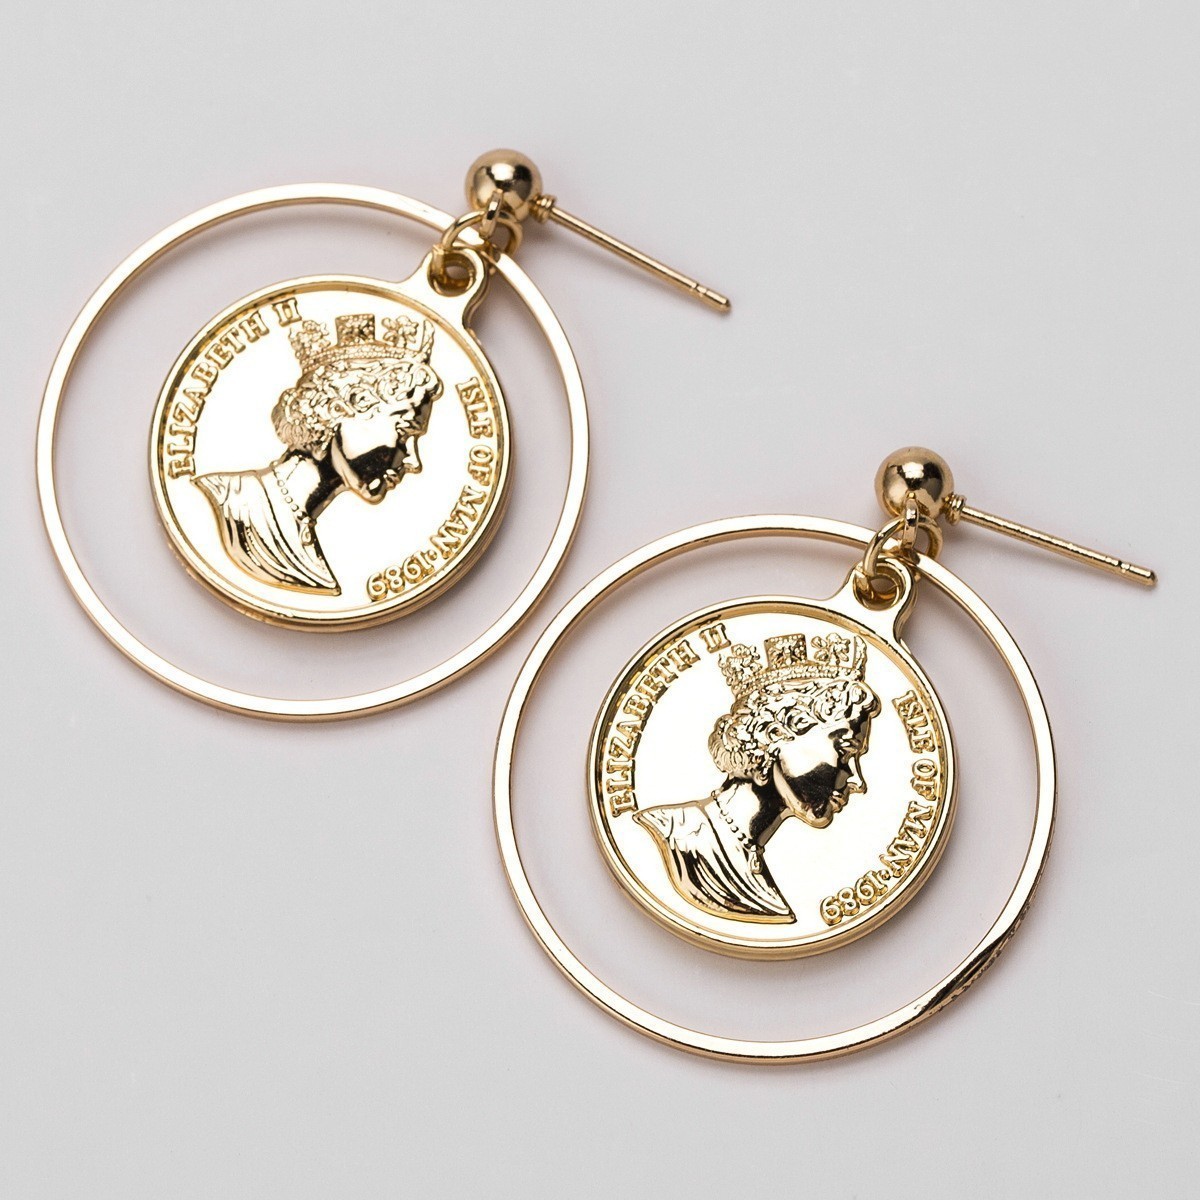 coin loop drop earrings studs gold color www.axelles-fashion.com ref 18047